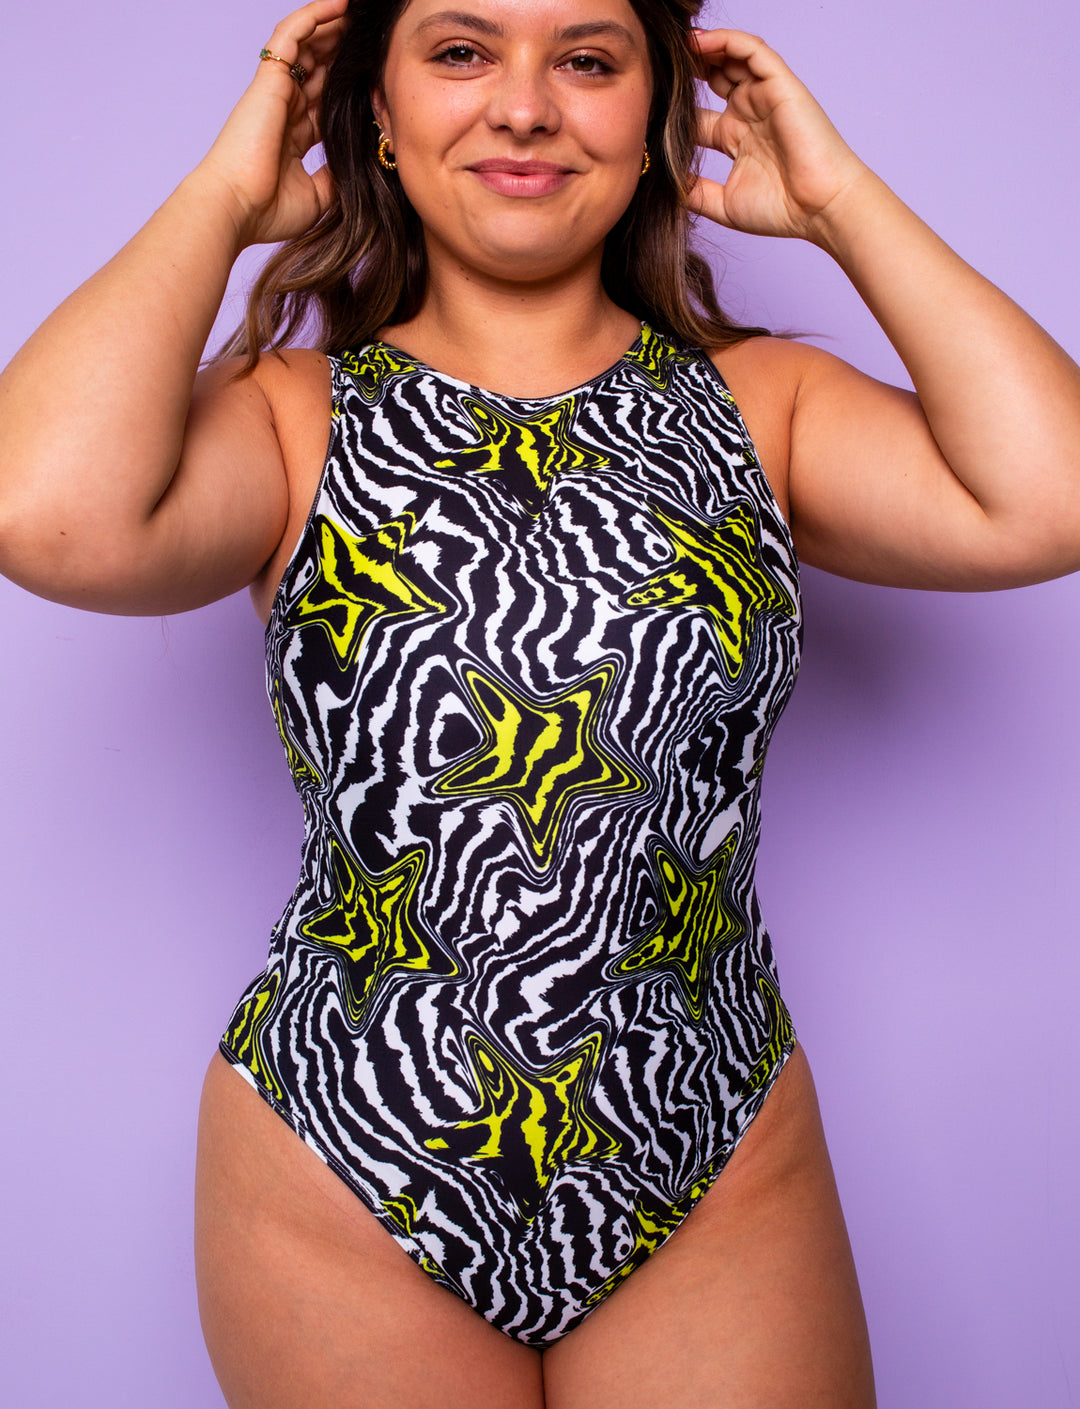 Woman wearing a high leg bodysuit with a black and white zebra print and yellow stars.